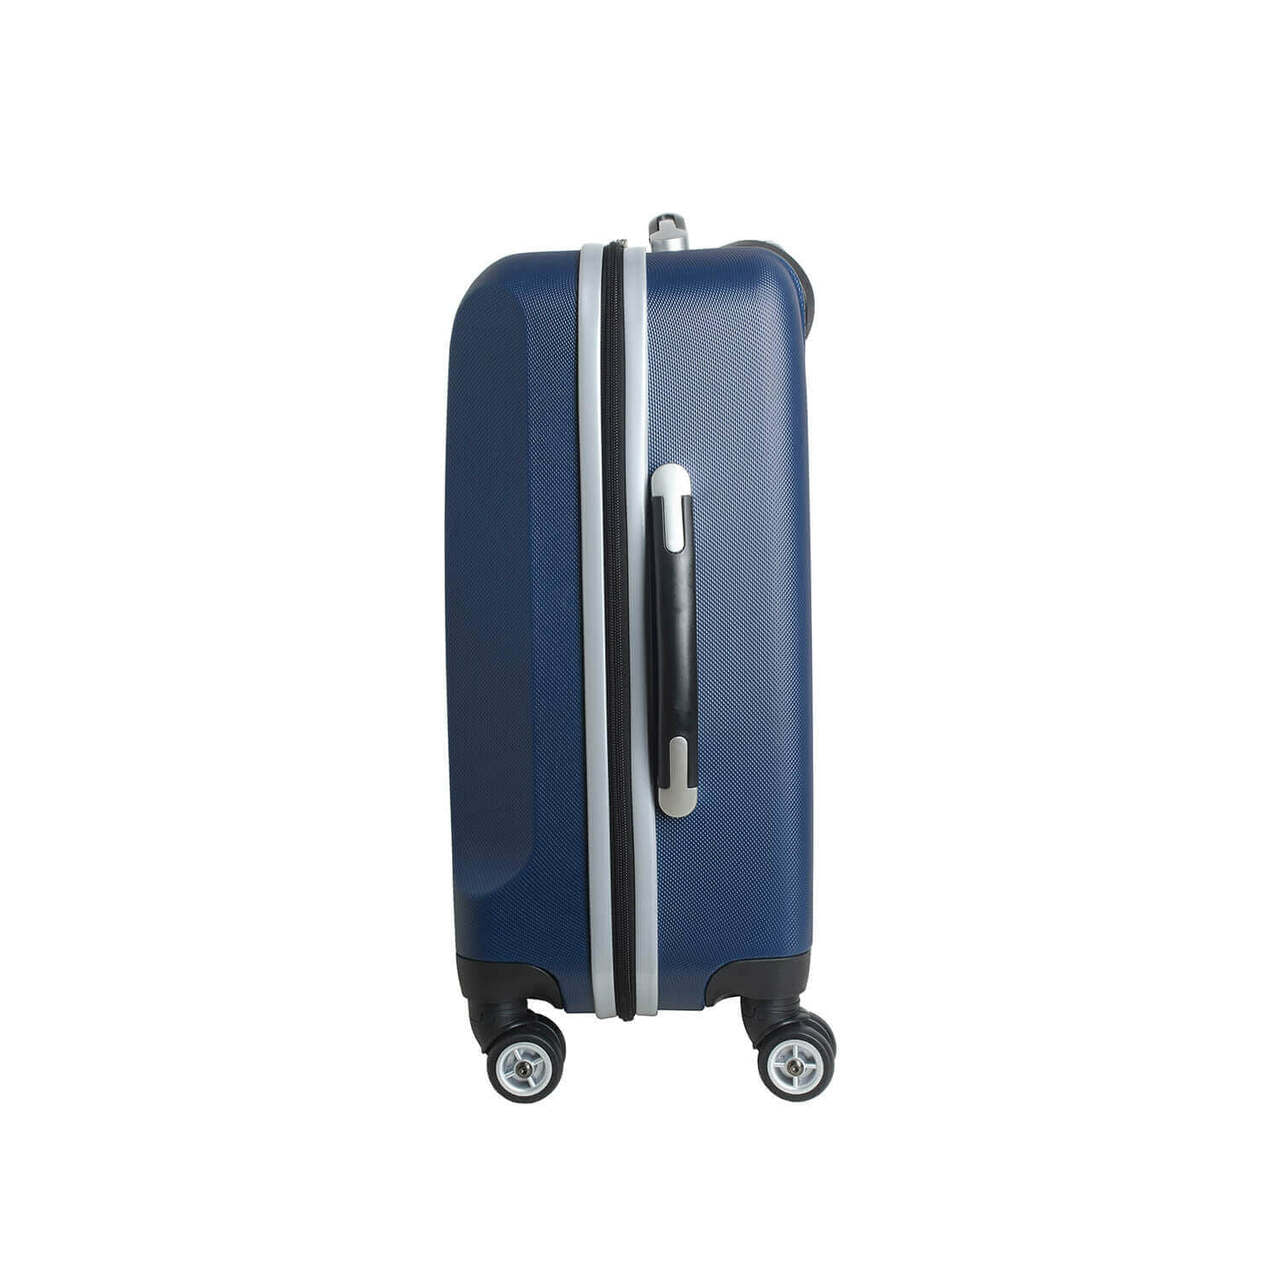 St Louis Cardinals 20" Navy Domestic Carry-on Spinner